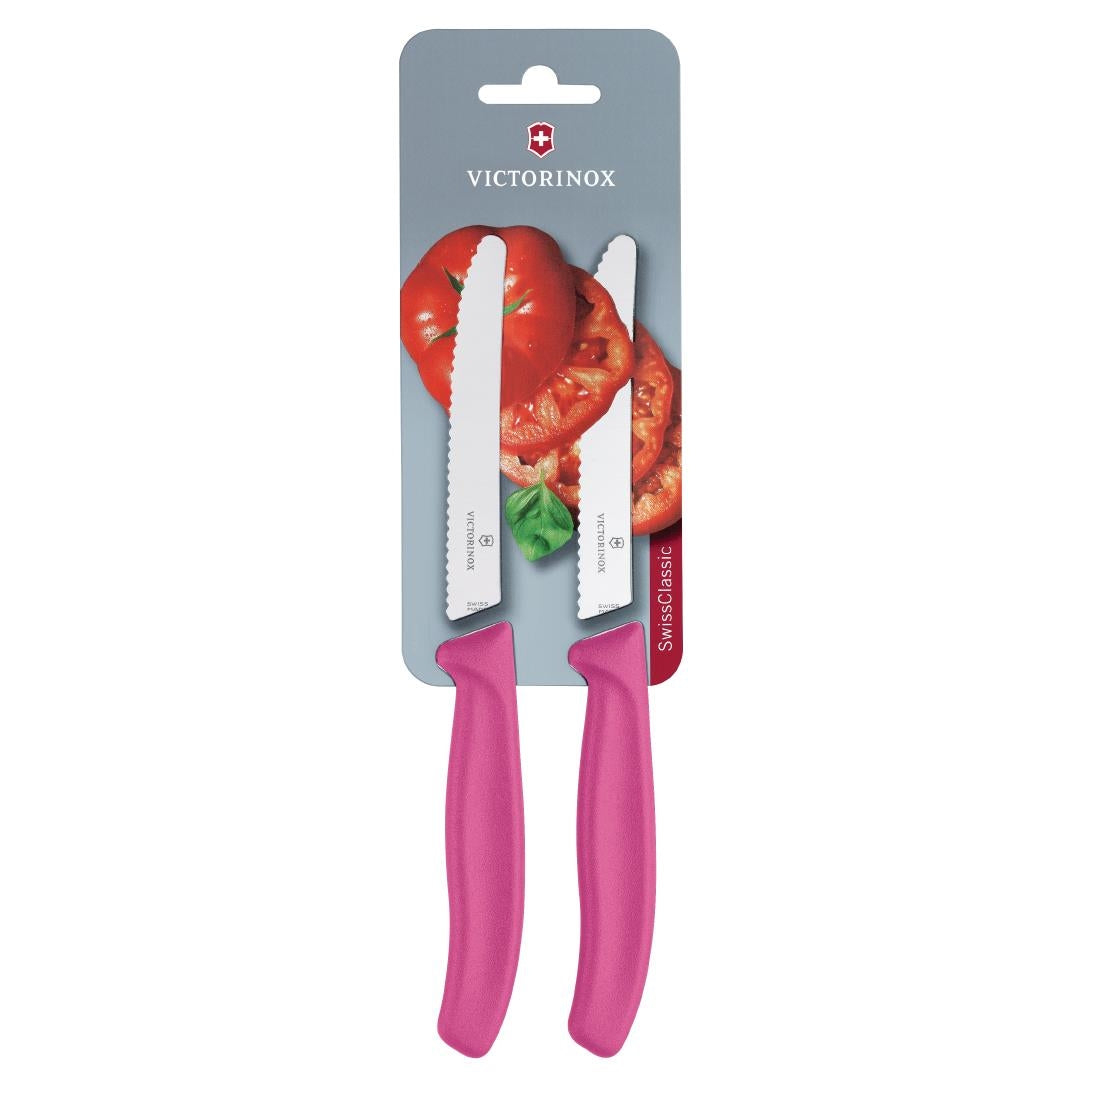 CU555 Victorinox 2 Piece Serrated Tomato/Utility Knife (Blister Pack) 11cm - Pink JD Catering Equipment Solutions Ltd